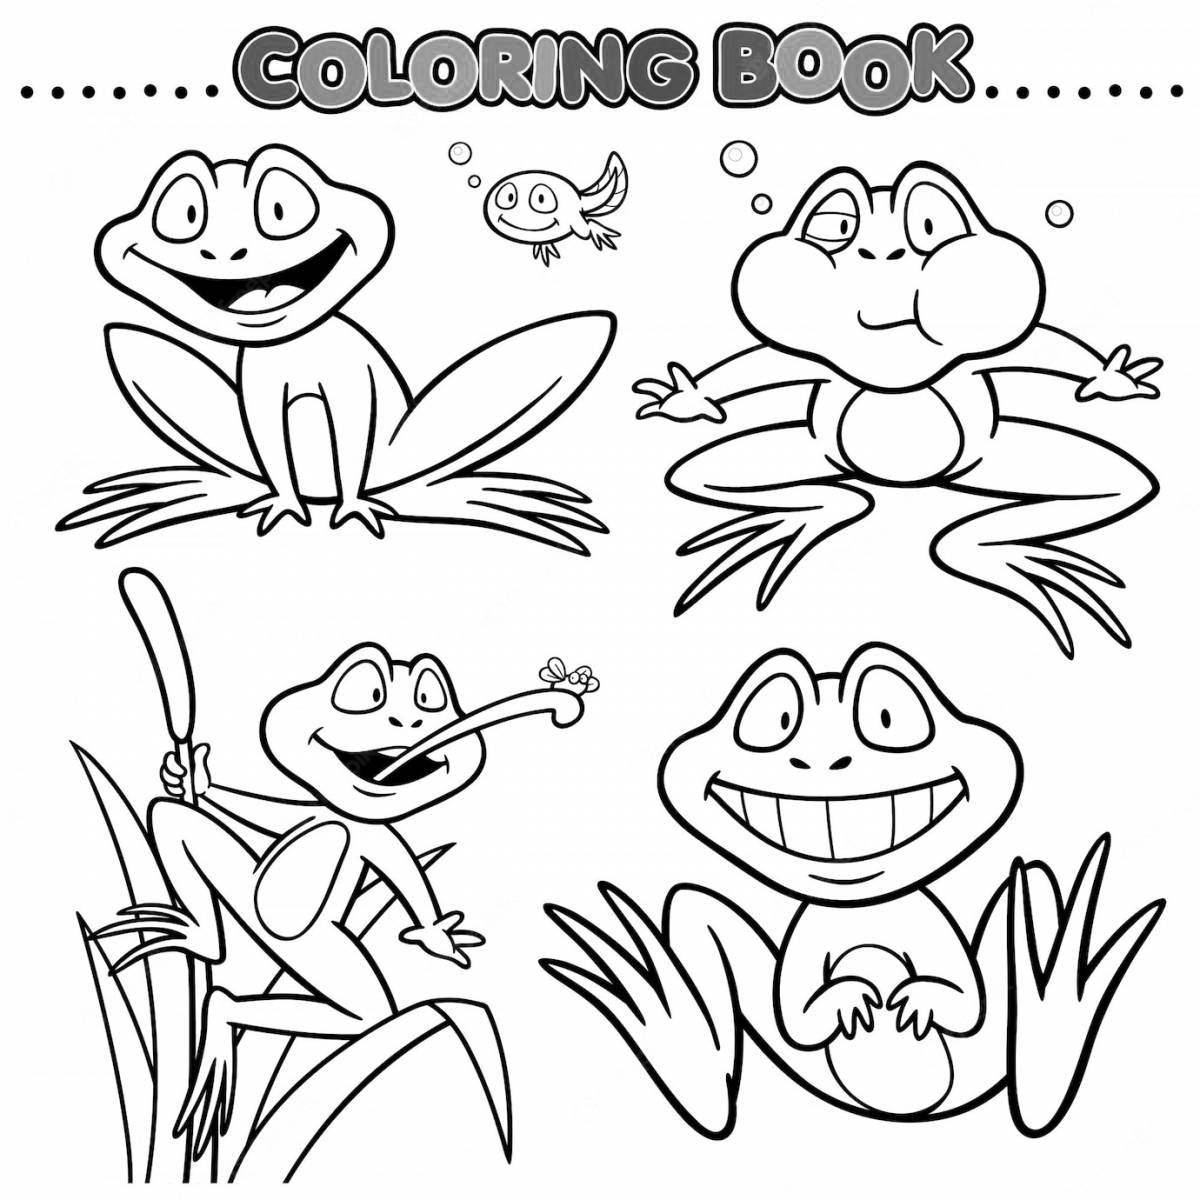 Great coloring cute frog from tik tok